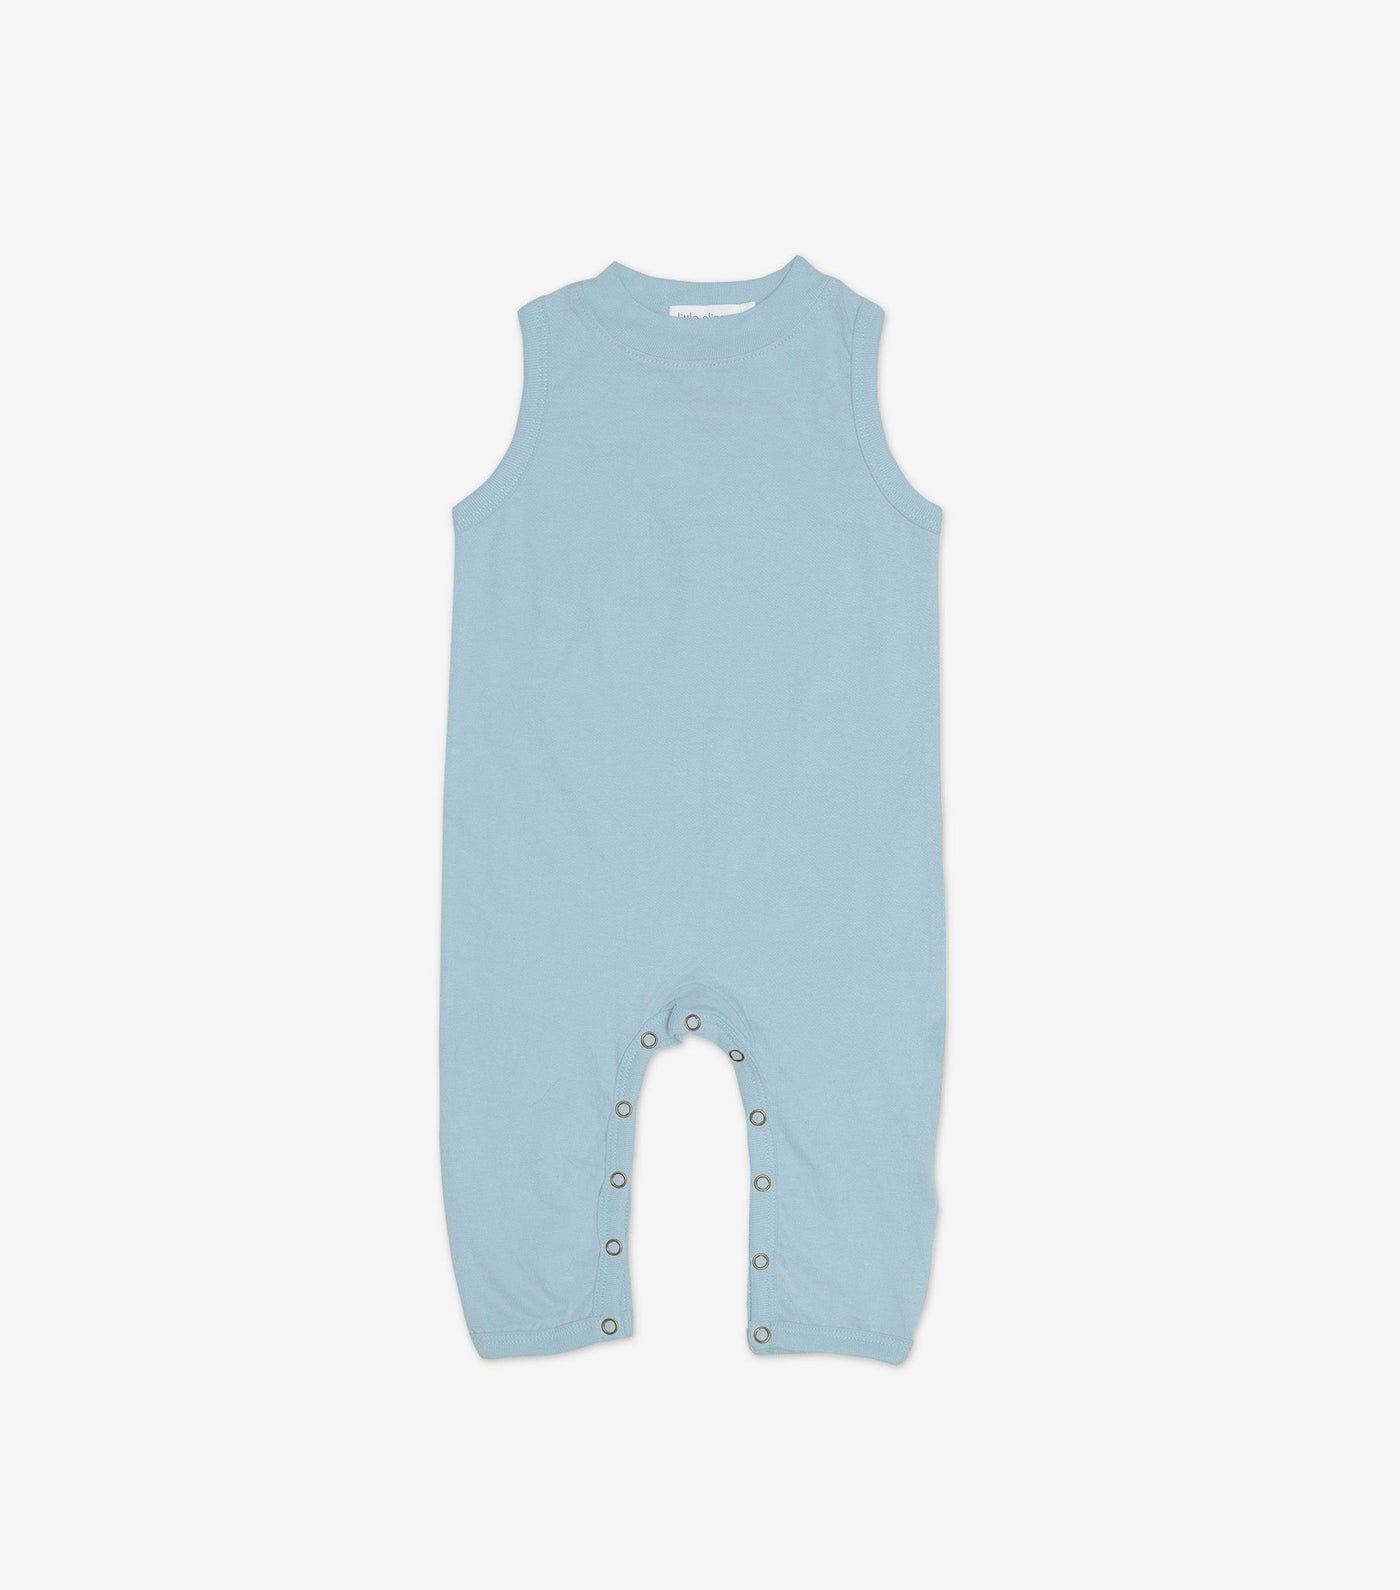 5 Pack of Baby Rompers